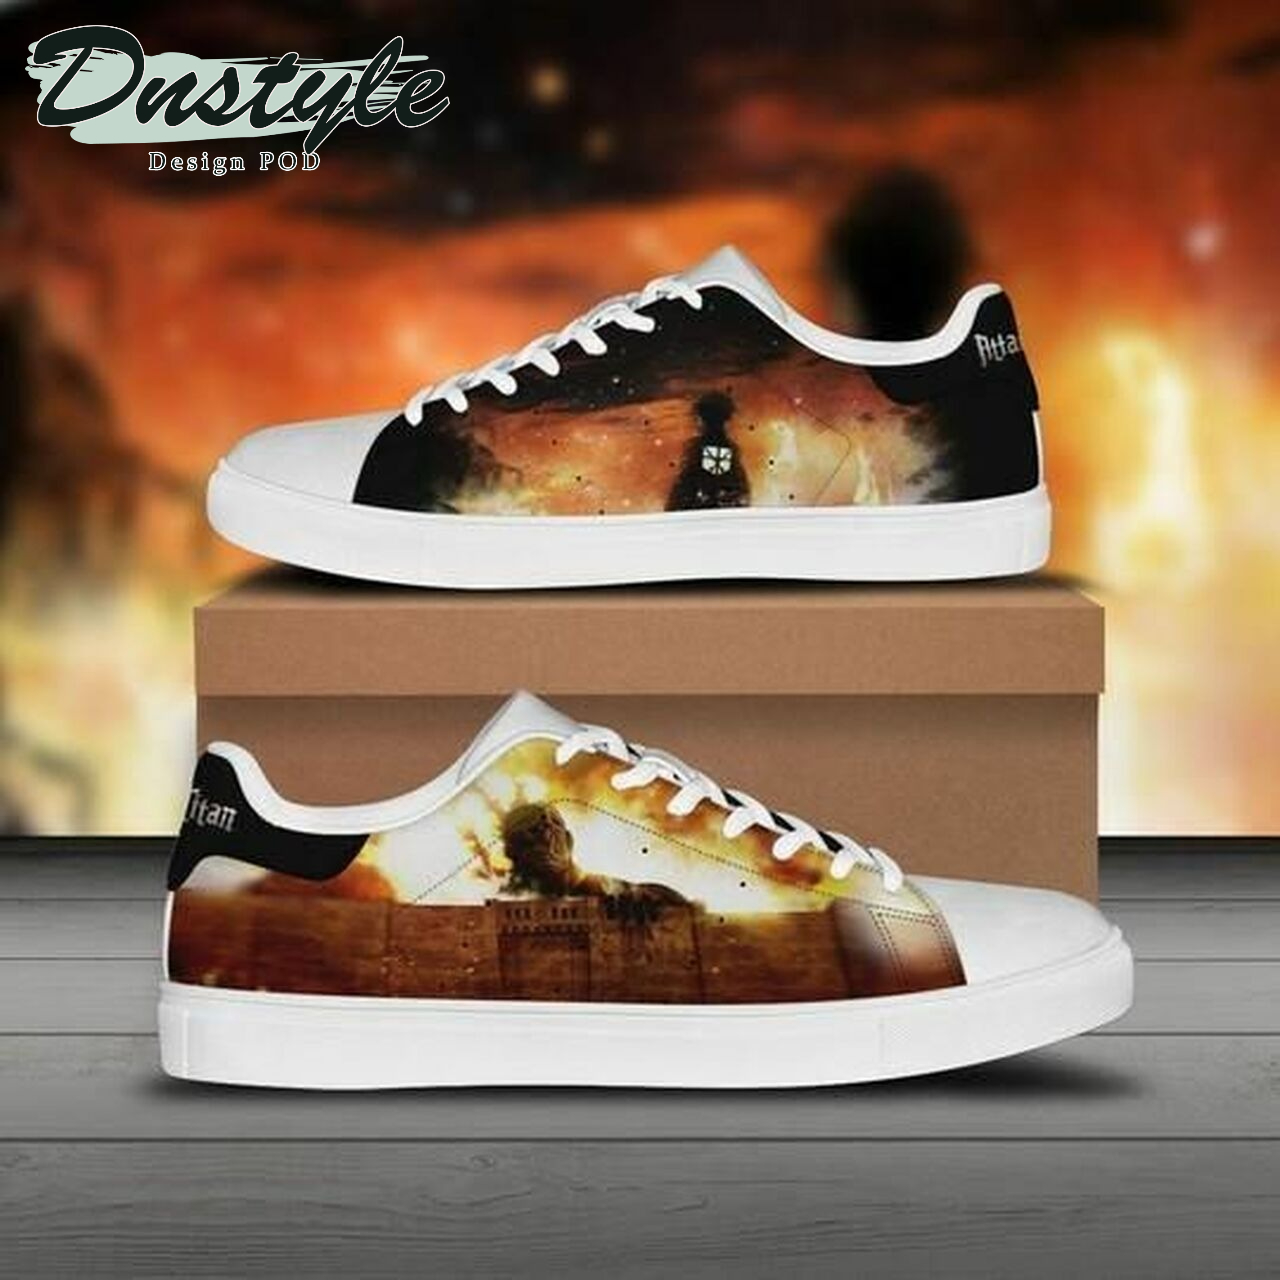 NFL aot attack on titan stan smith low top skate shoes